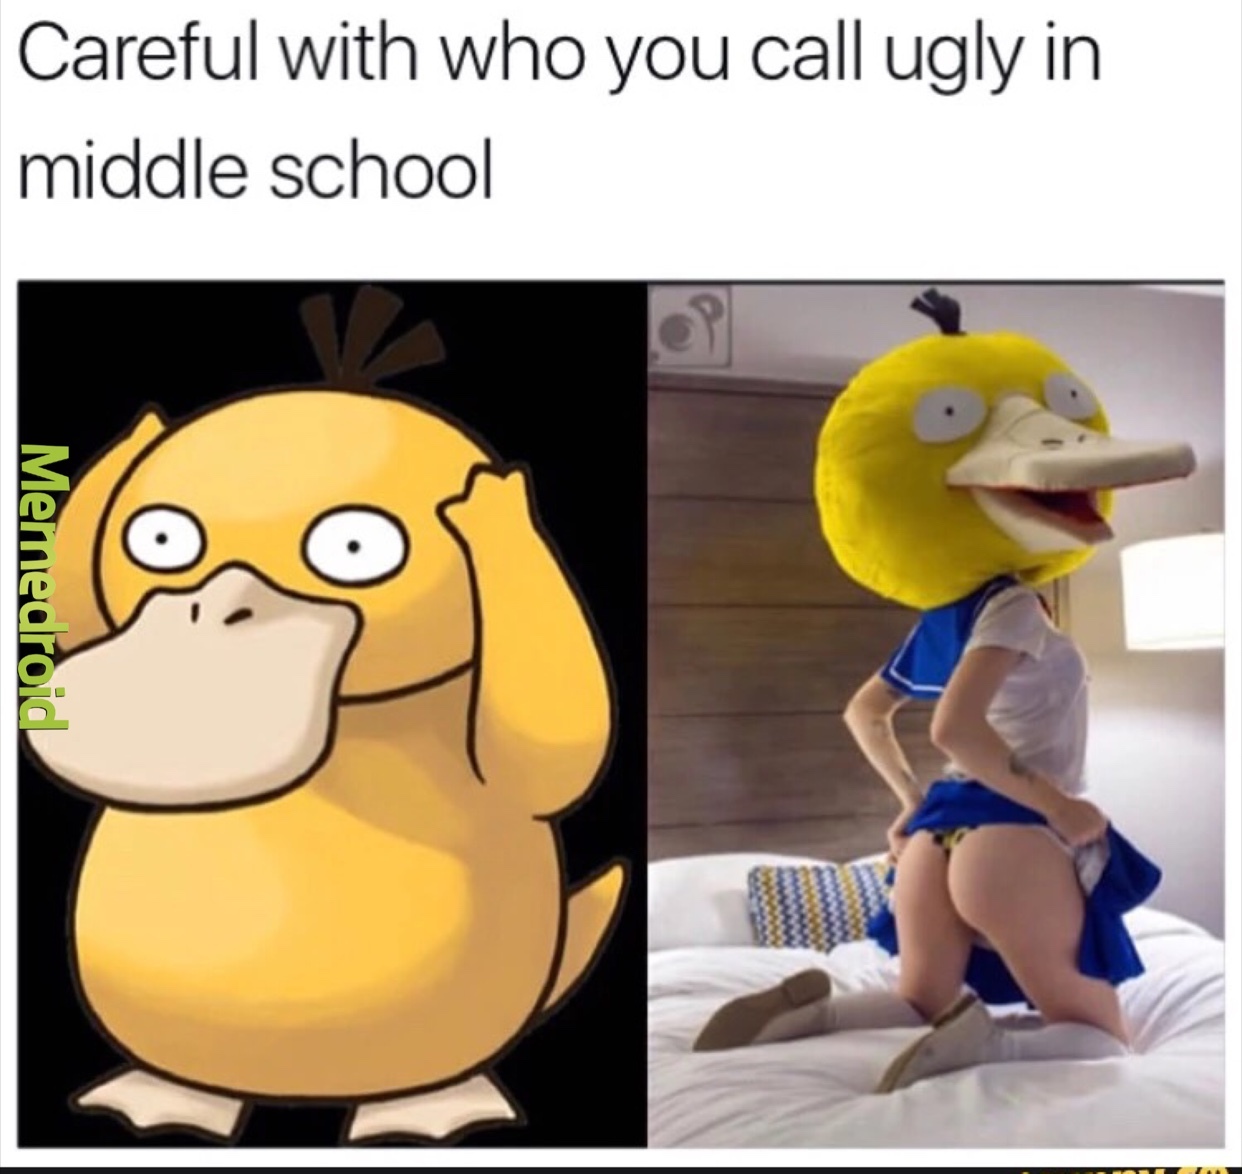 puberty is funny - meme